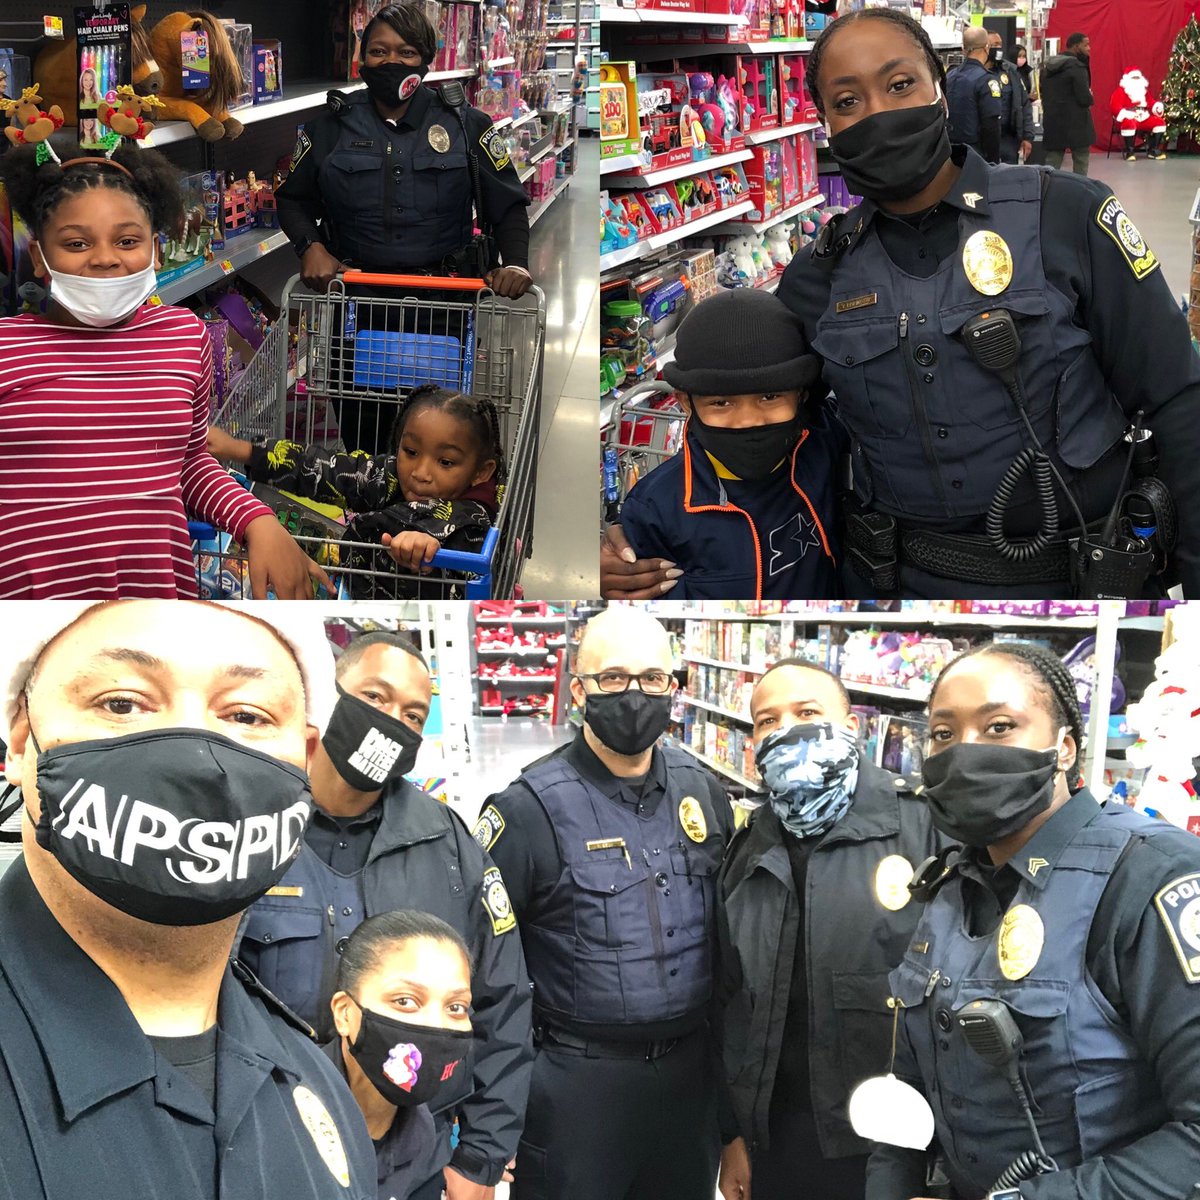 APSPD Officers had a great time today shopping with the kids at the Fulton FOP Lodge Kids & Cops Christmas. Seeing the smiles of so many @apsupdate scholars and other kids was good for the soul!!